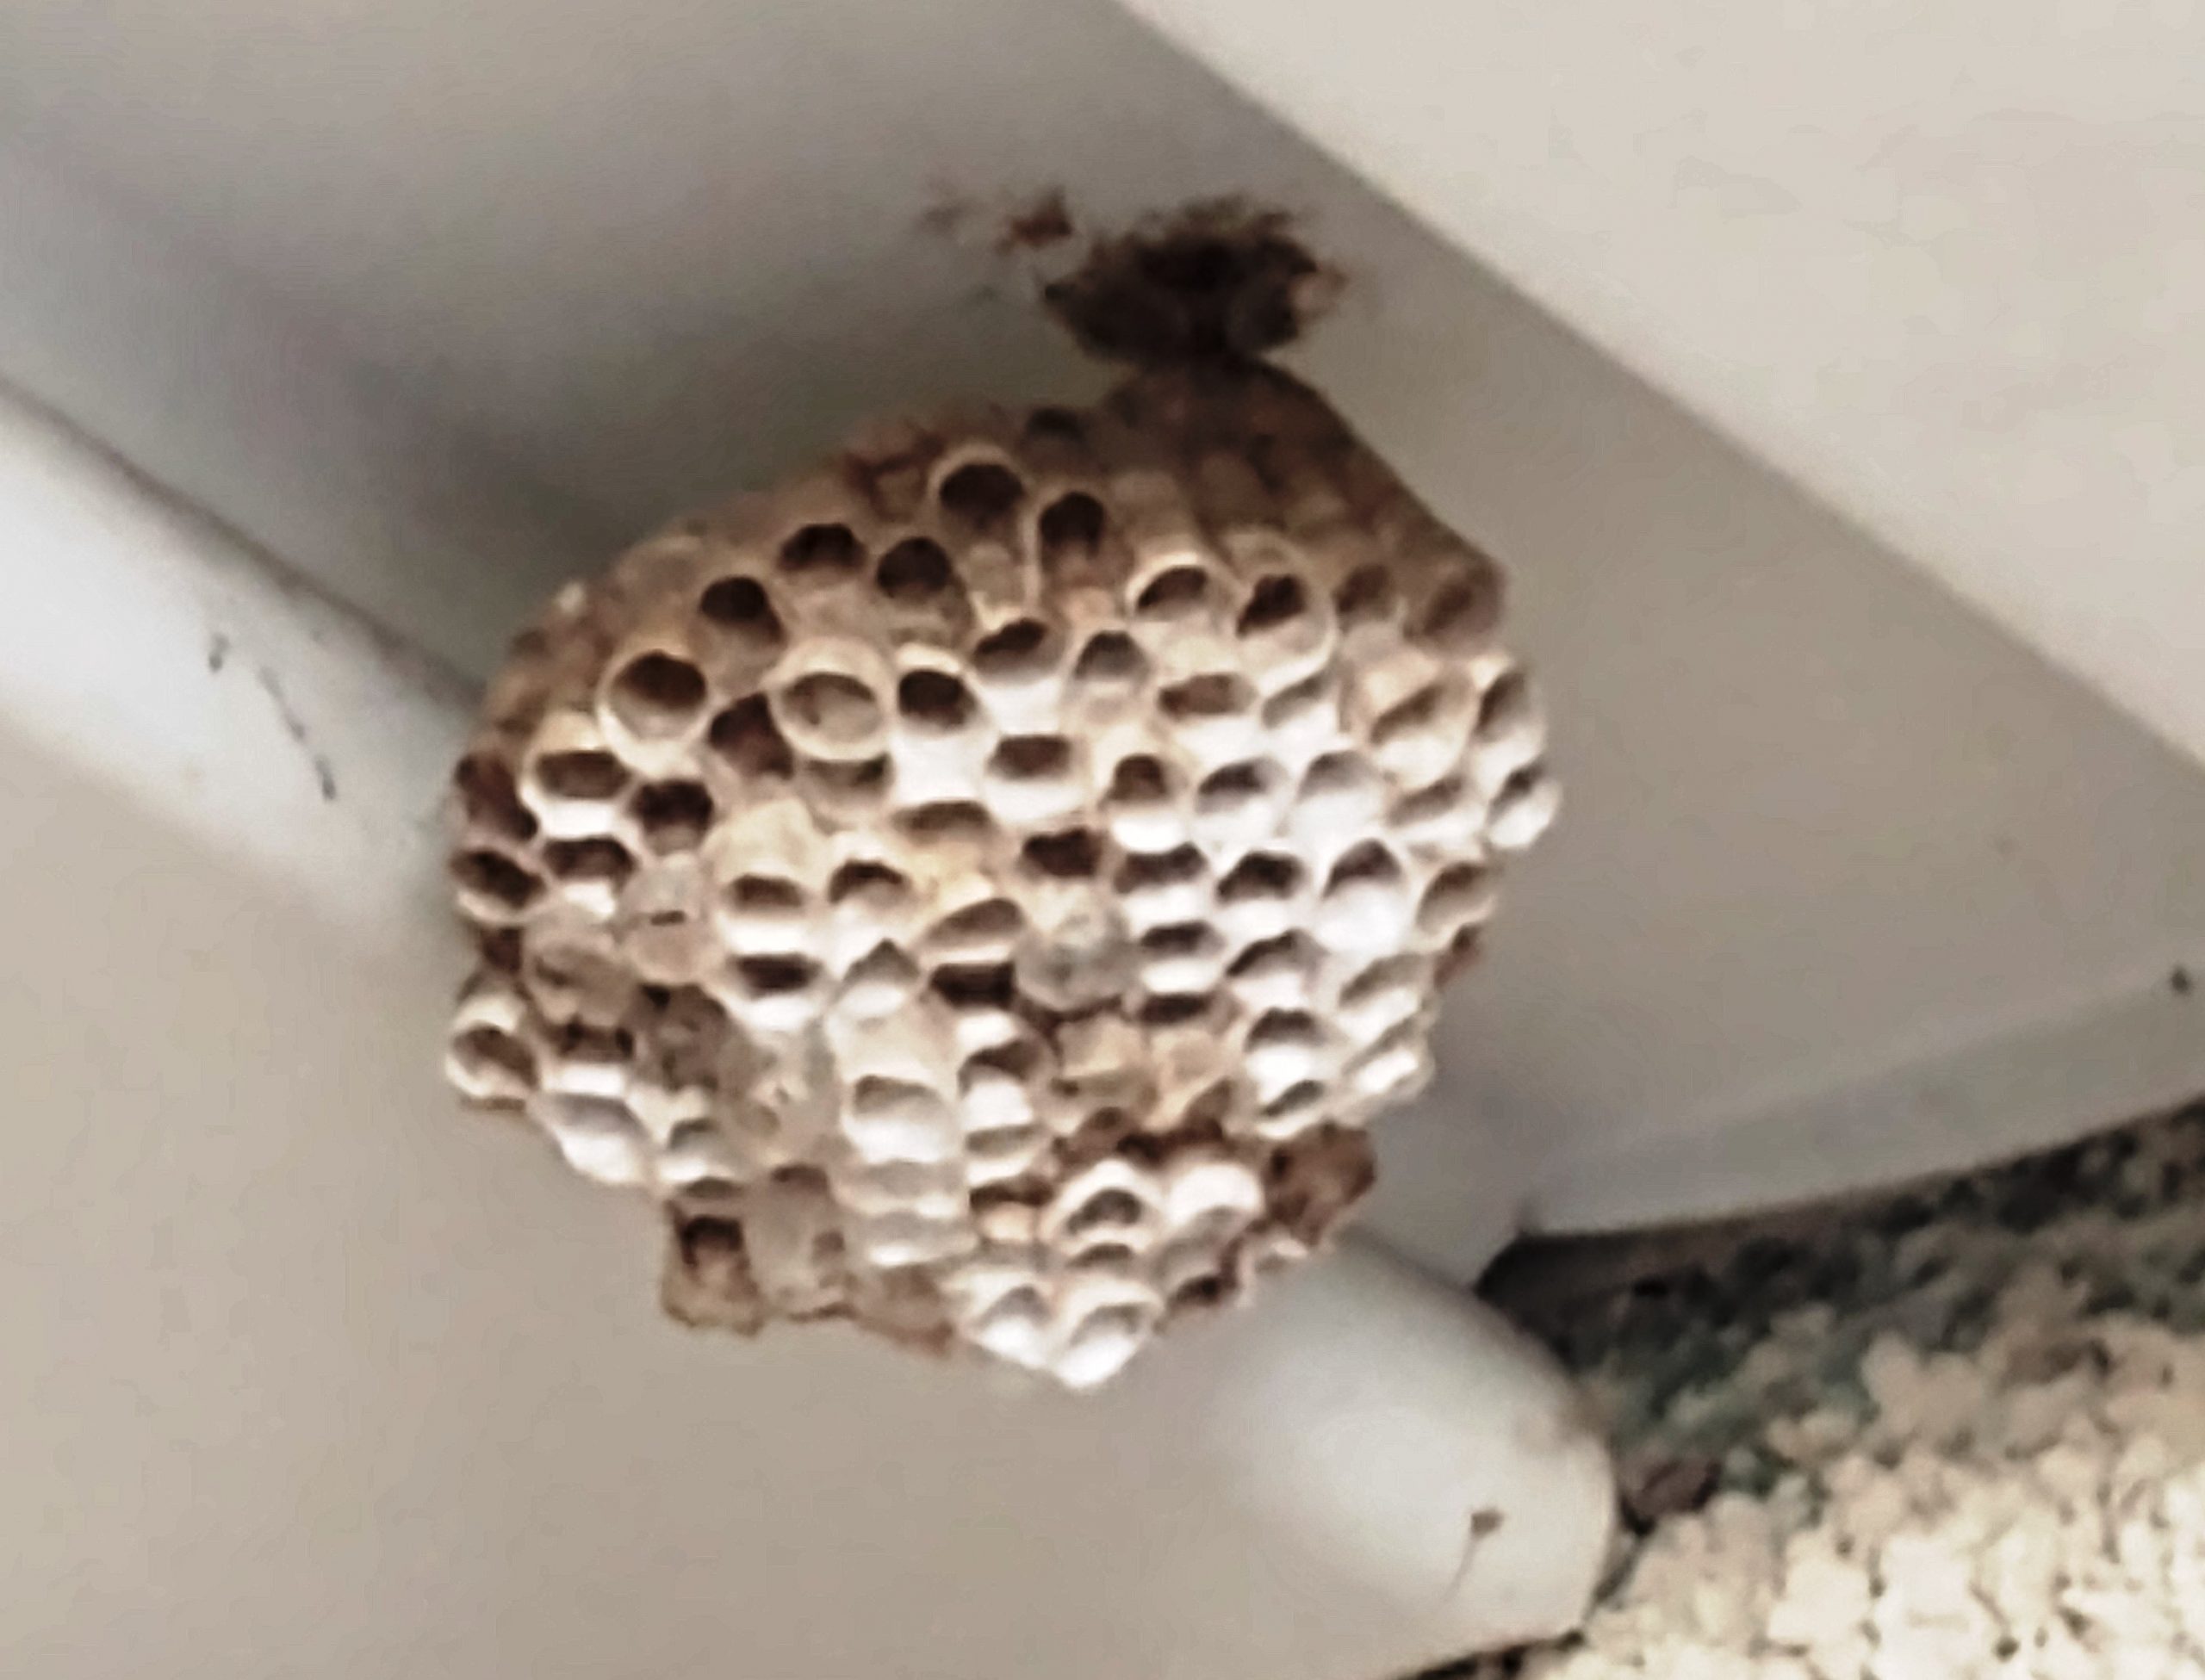 What two wasp nests taught me